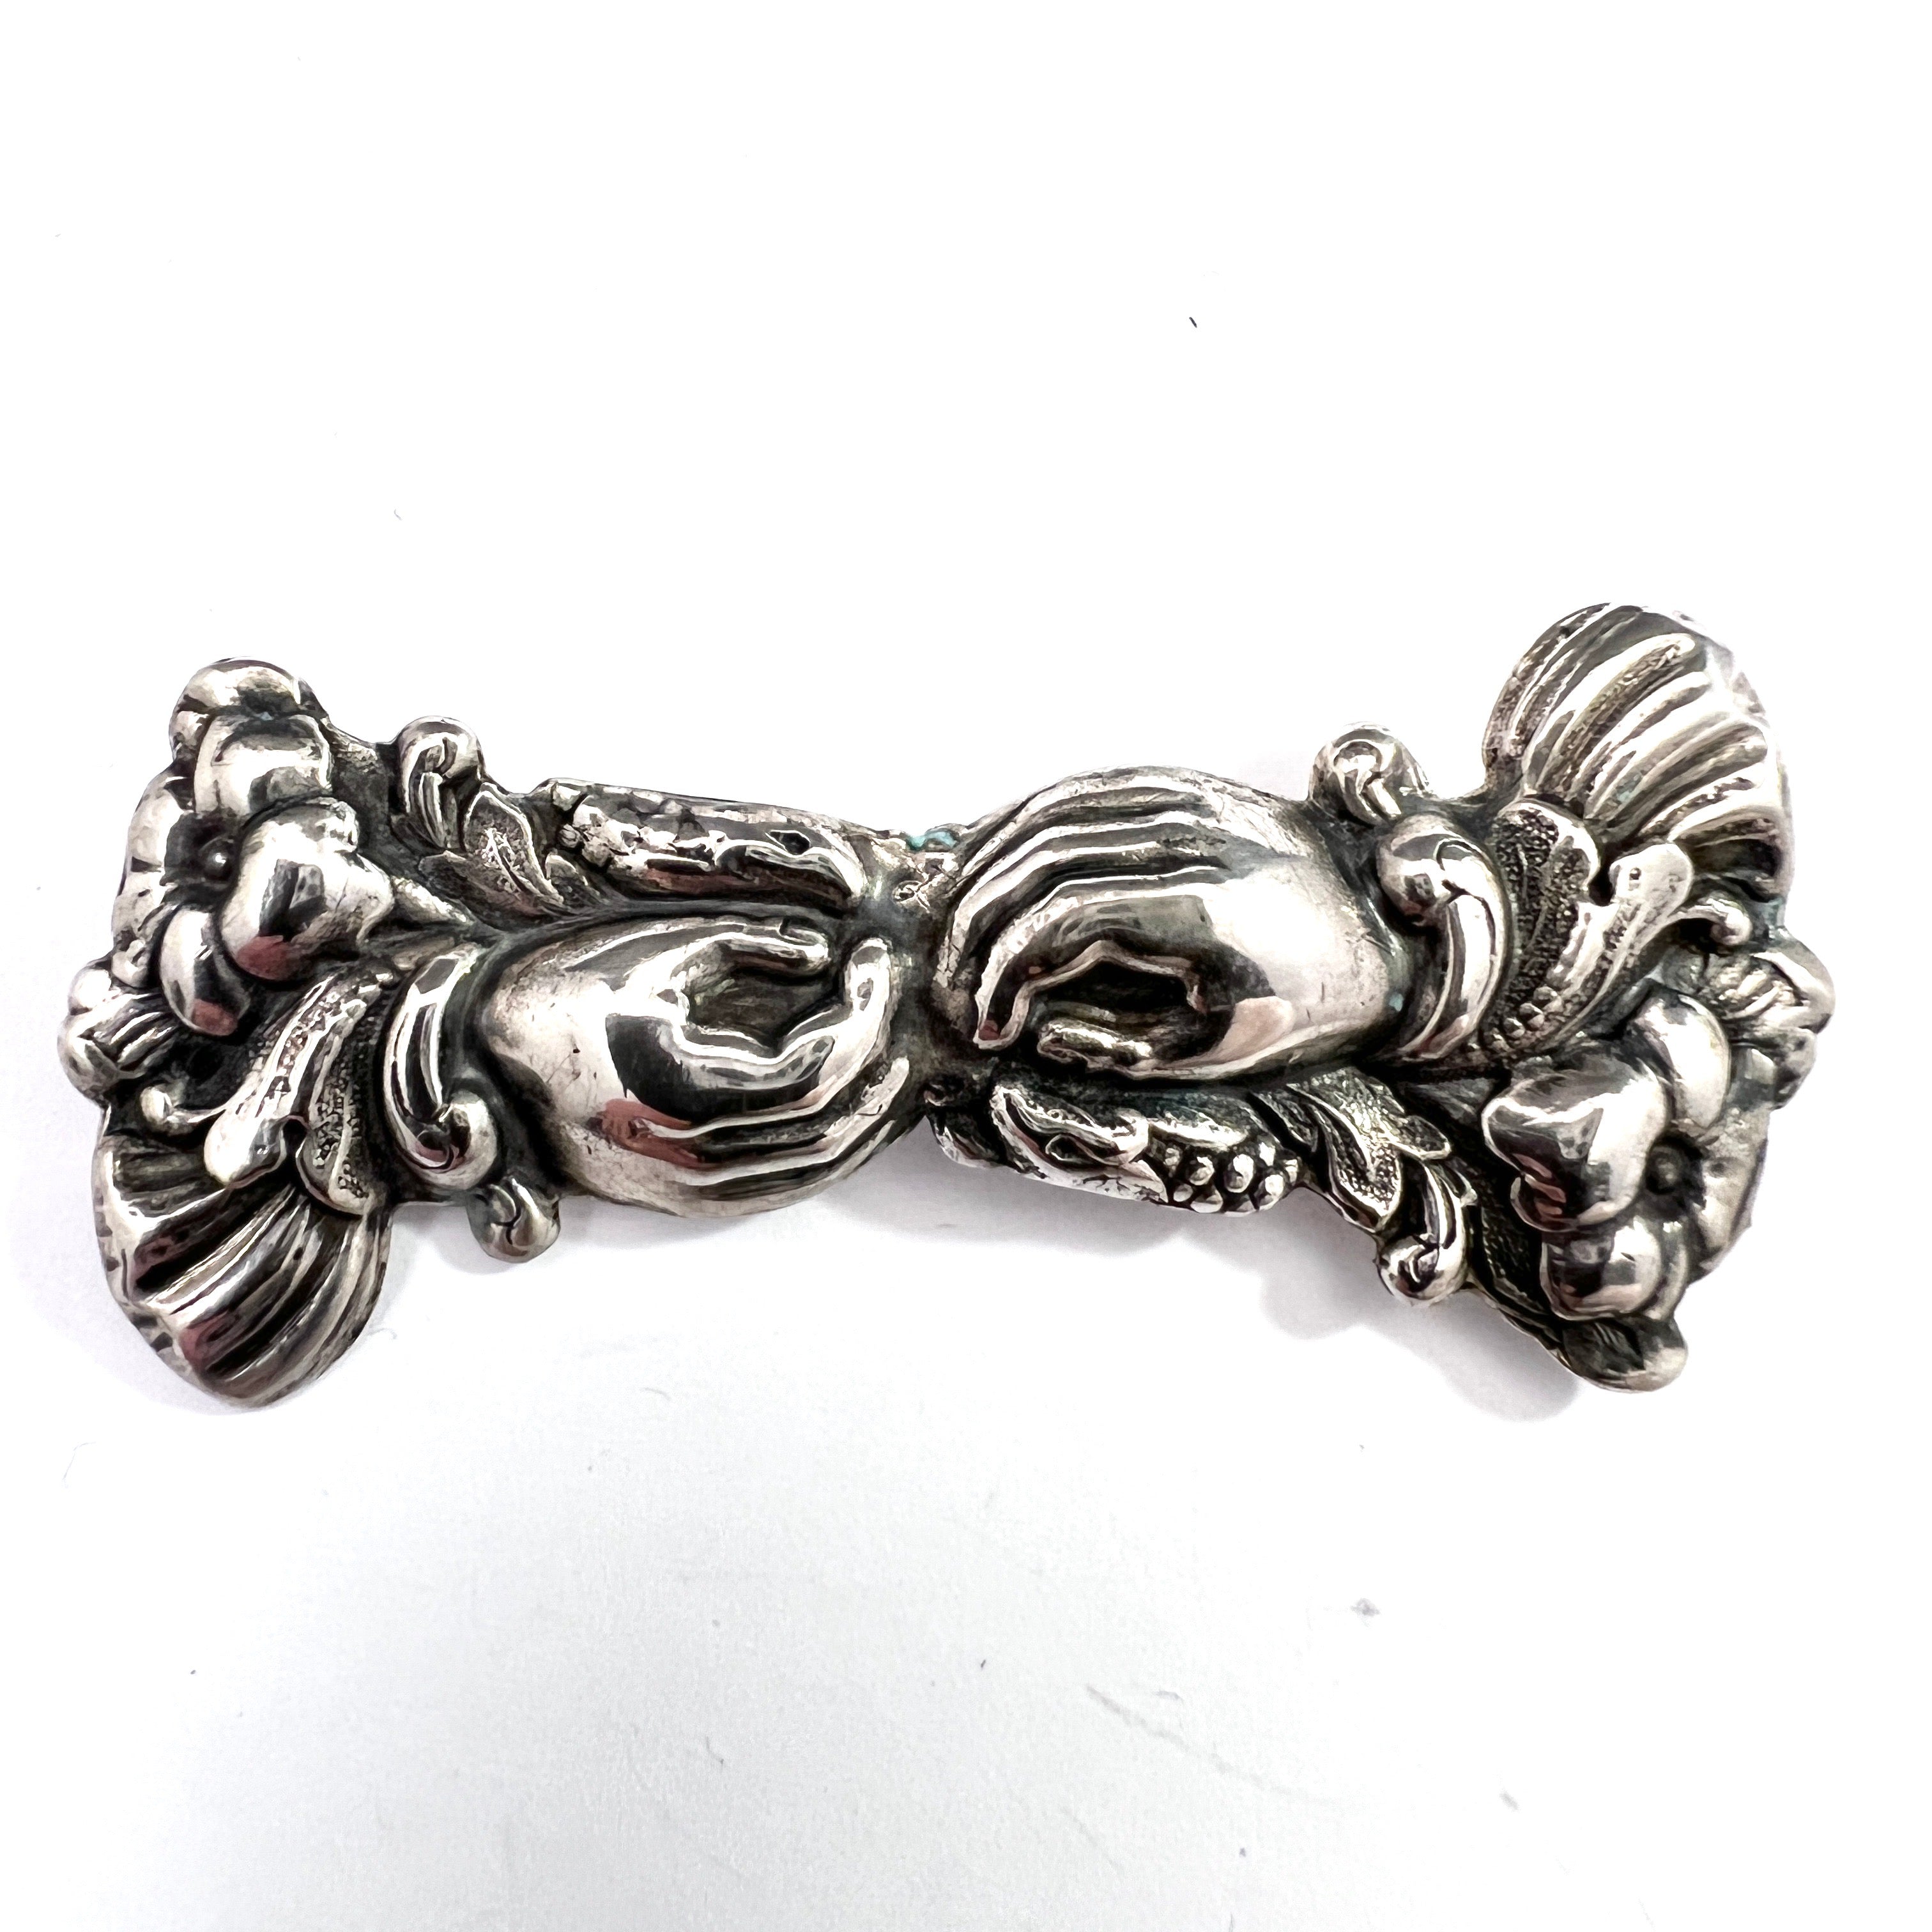 Sweden c 1870s Silver Scatter Pins Converted to Brooch c 1950s.